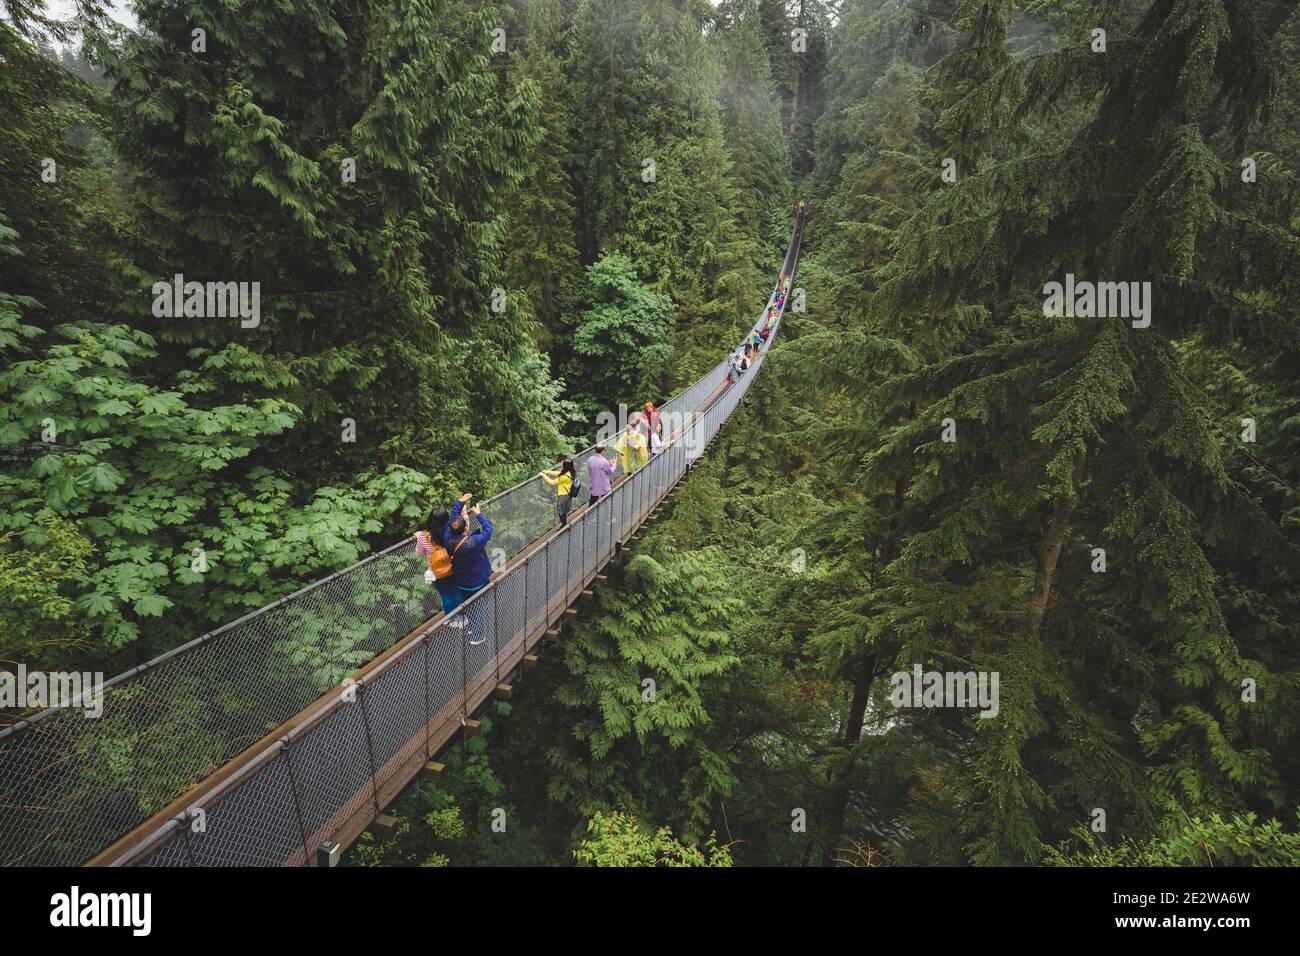 Vancouver, Canada - June 2 2017: Tourists enjoy a visit to the Capilano Suspension Bridge Park in North Vancouver, B.C. Canada Stock Photo